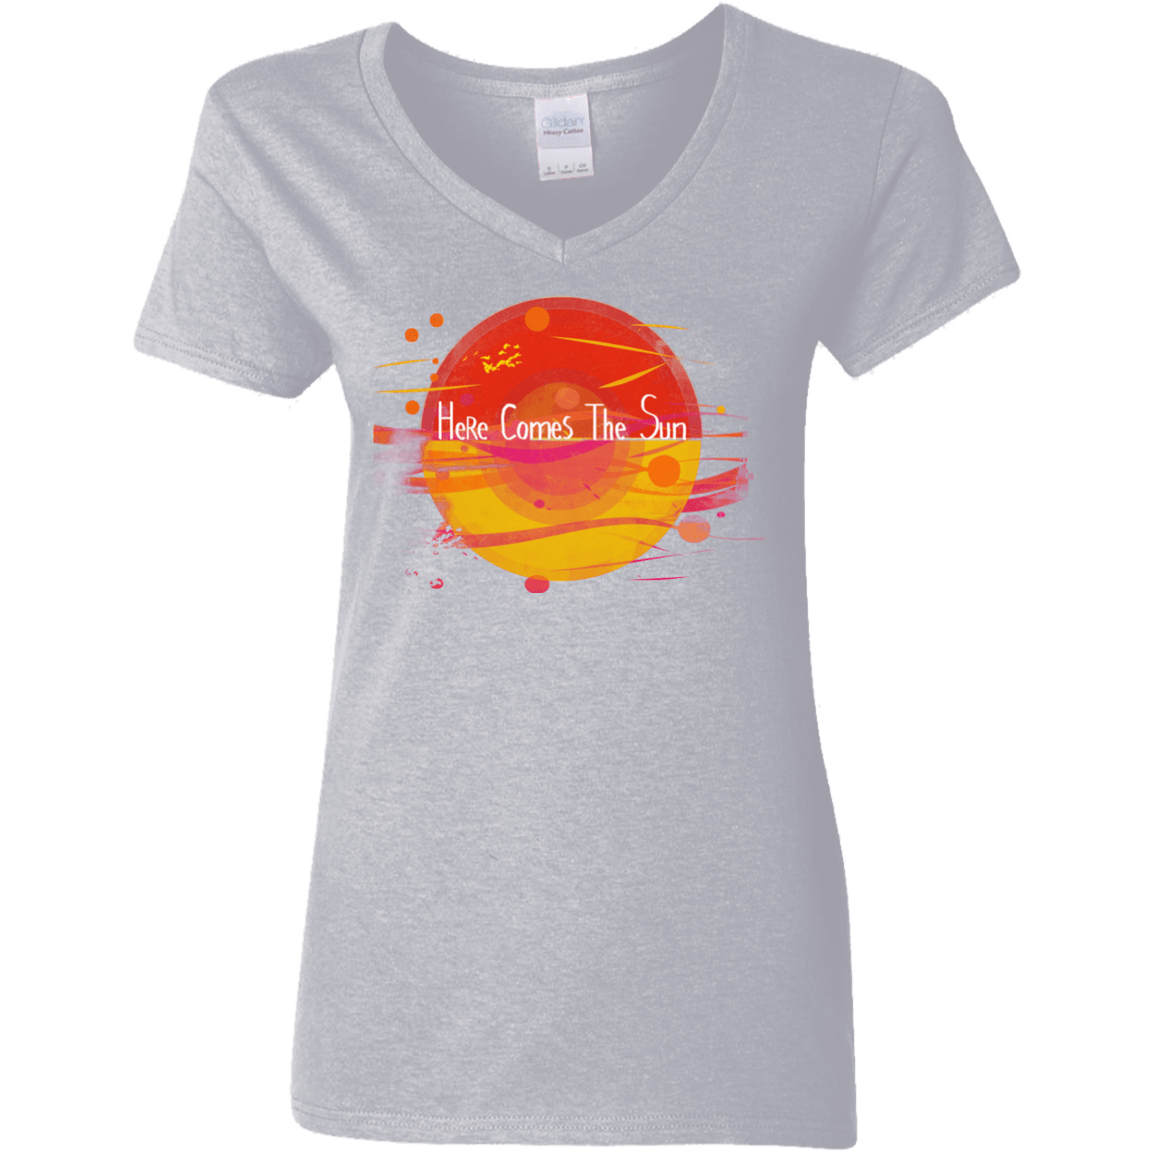 T-Shirts Sport Grey / S Here Comes The Sun (1) Women's V-Neck T-Shirt